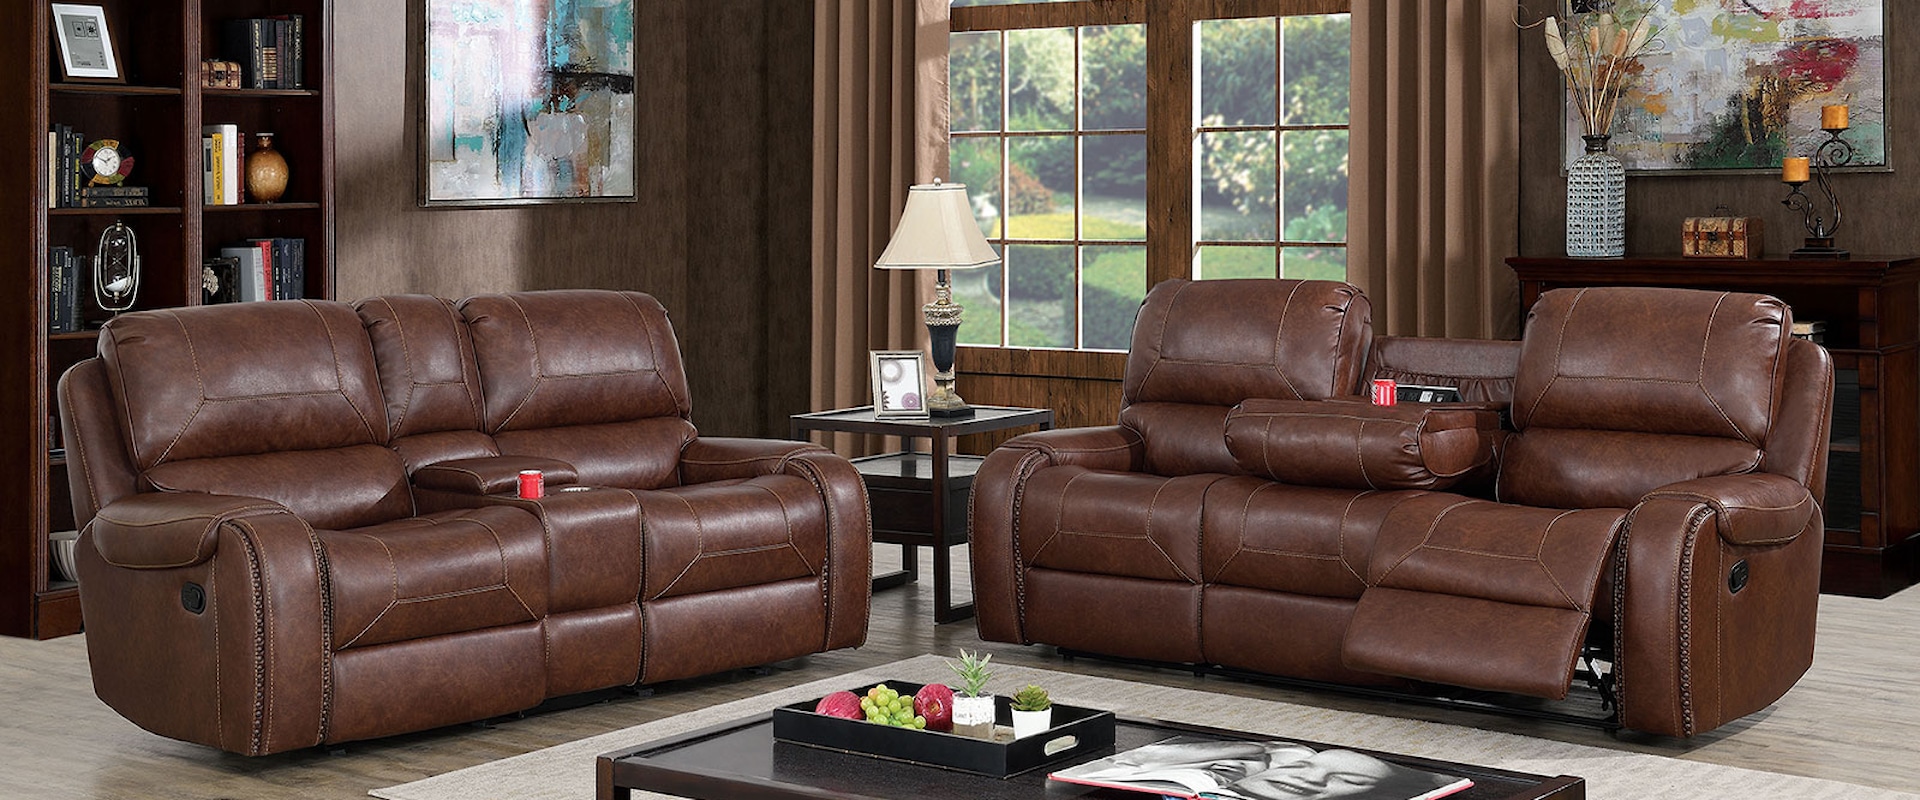 Transitional Sofa and Loveseat Set with Nailhead Trim 